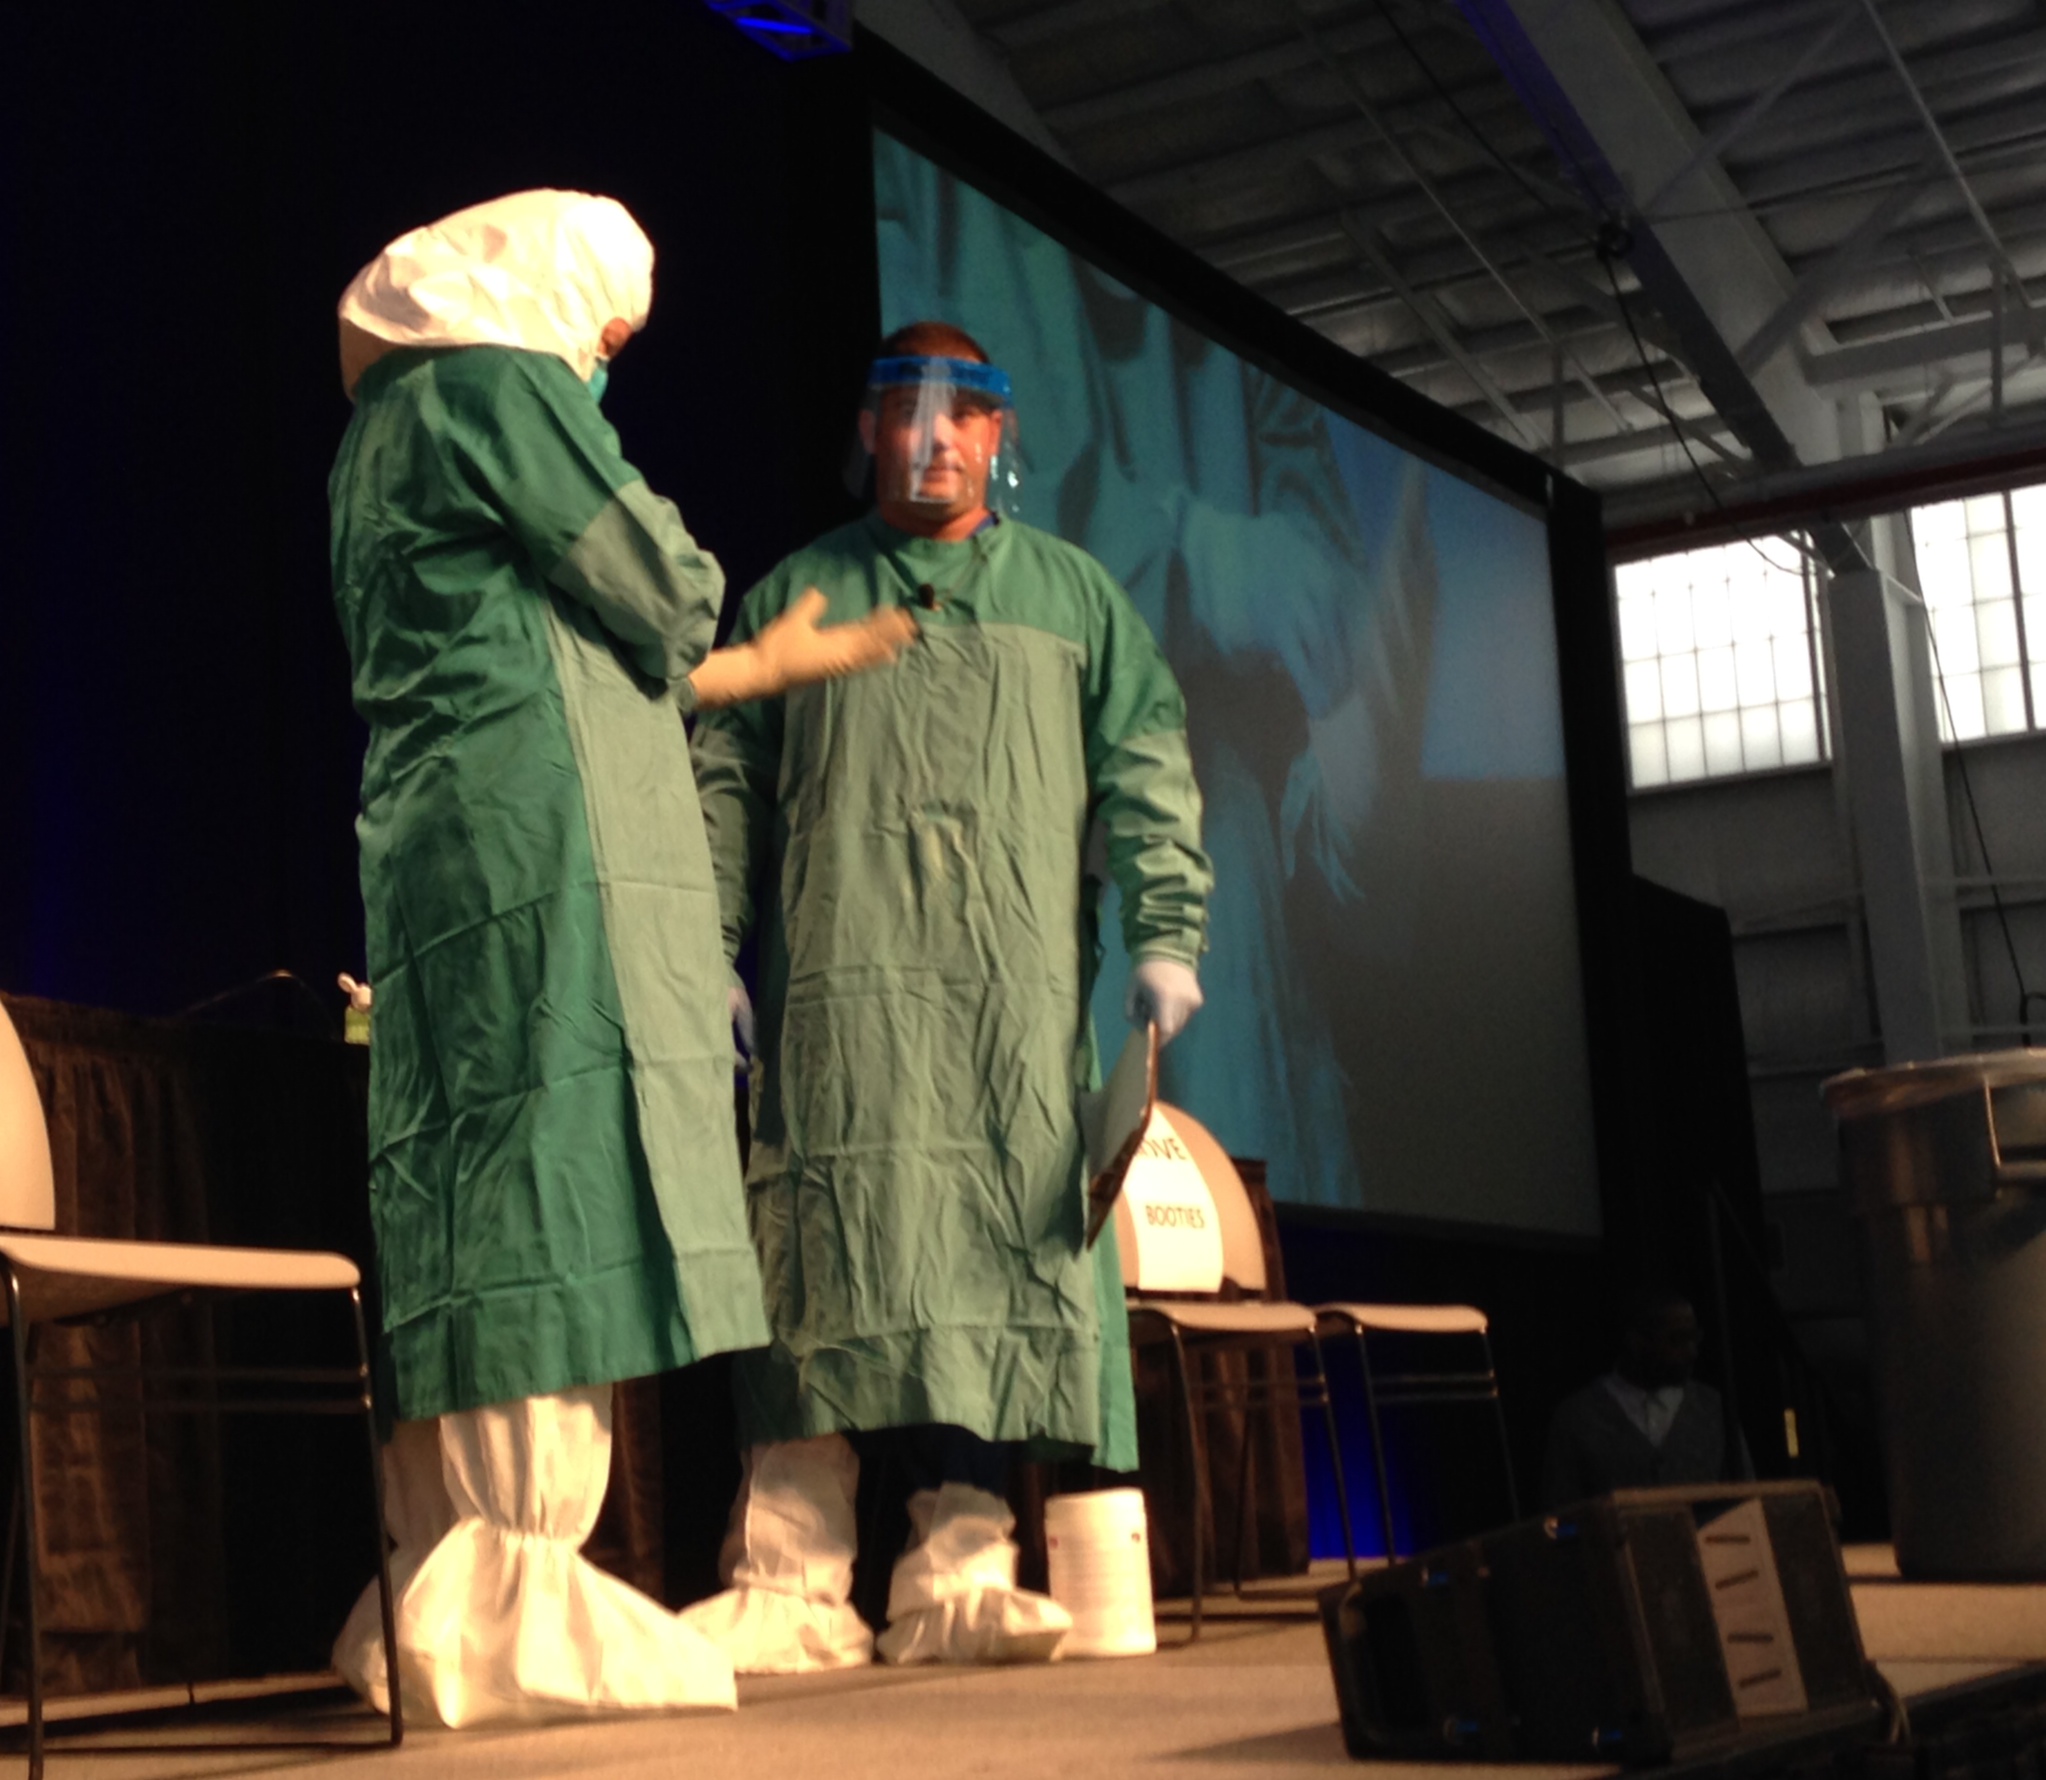 CDC and Mount Sinai health workers demonstrate how to put on and off Ebola personal protective equipment at an Ebola education session in New York City (Alexandra Sifferlin)